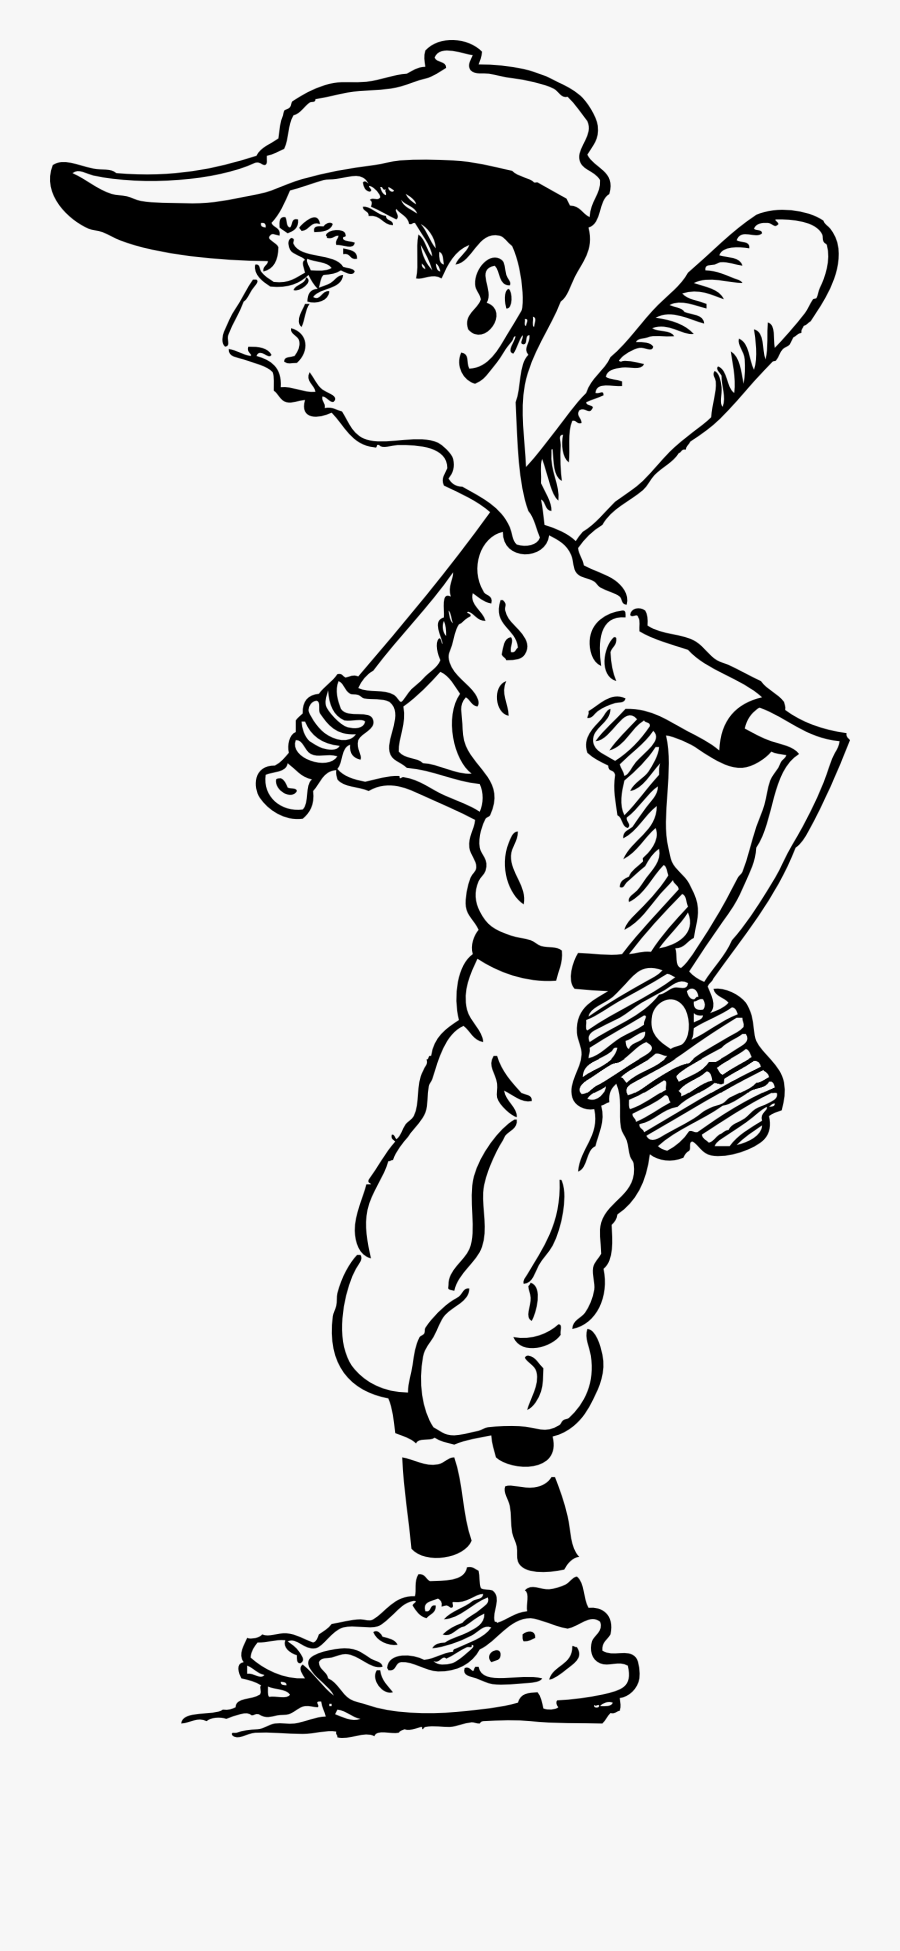 Old Man Baseball Clipart Black And White, Transparent Clipart